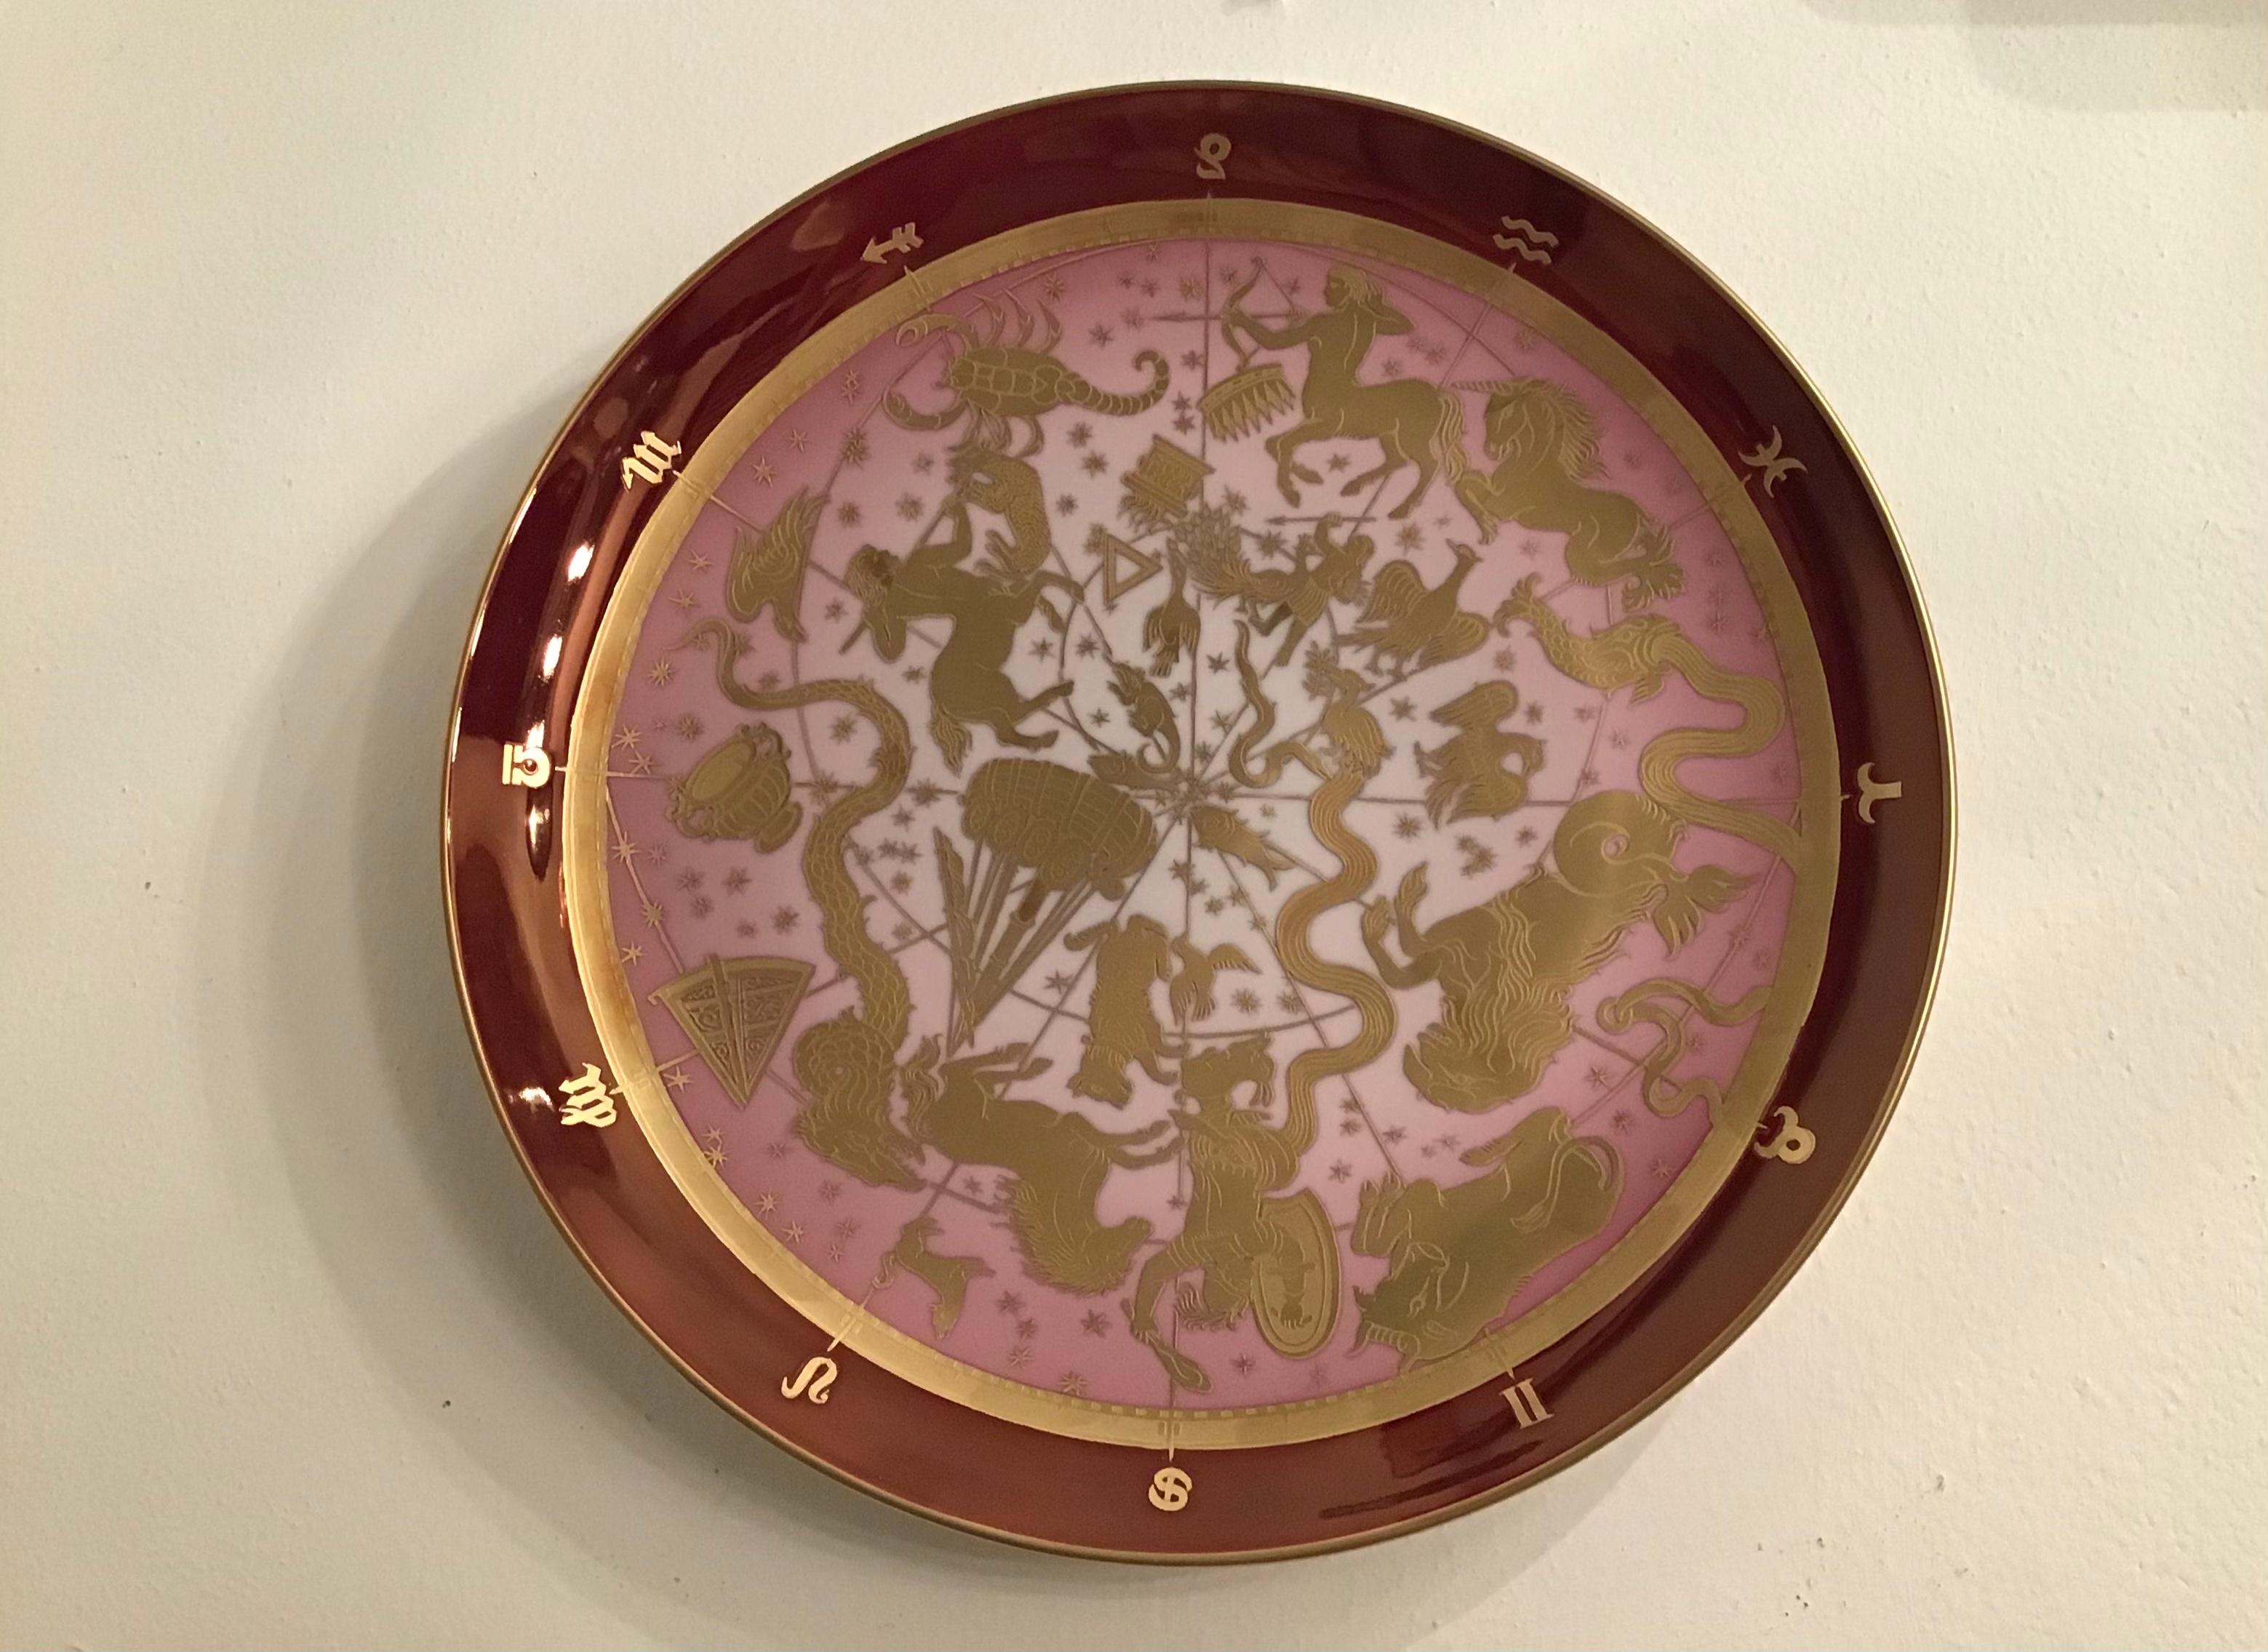 Morbelli porcelain wall plate “ Planisfero Celeste“ worked with pure gold 1960 Italy.